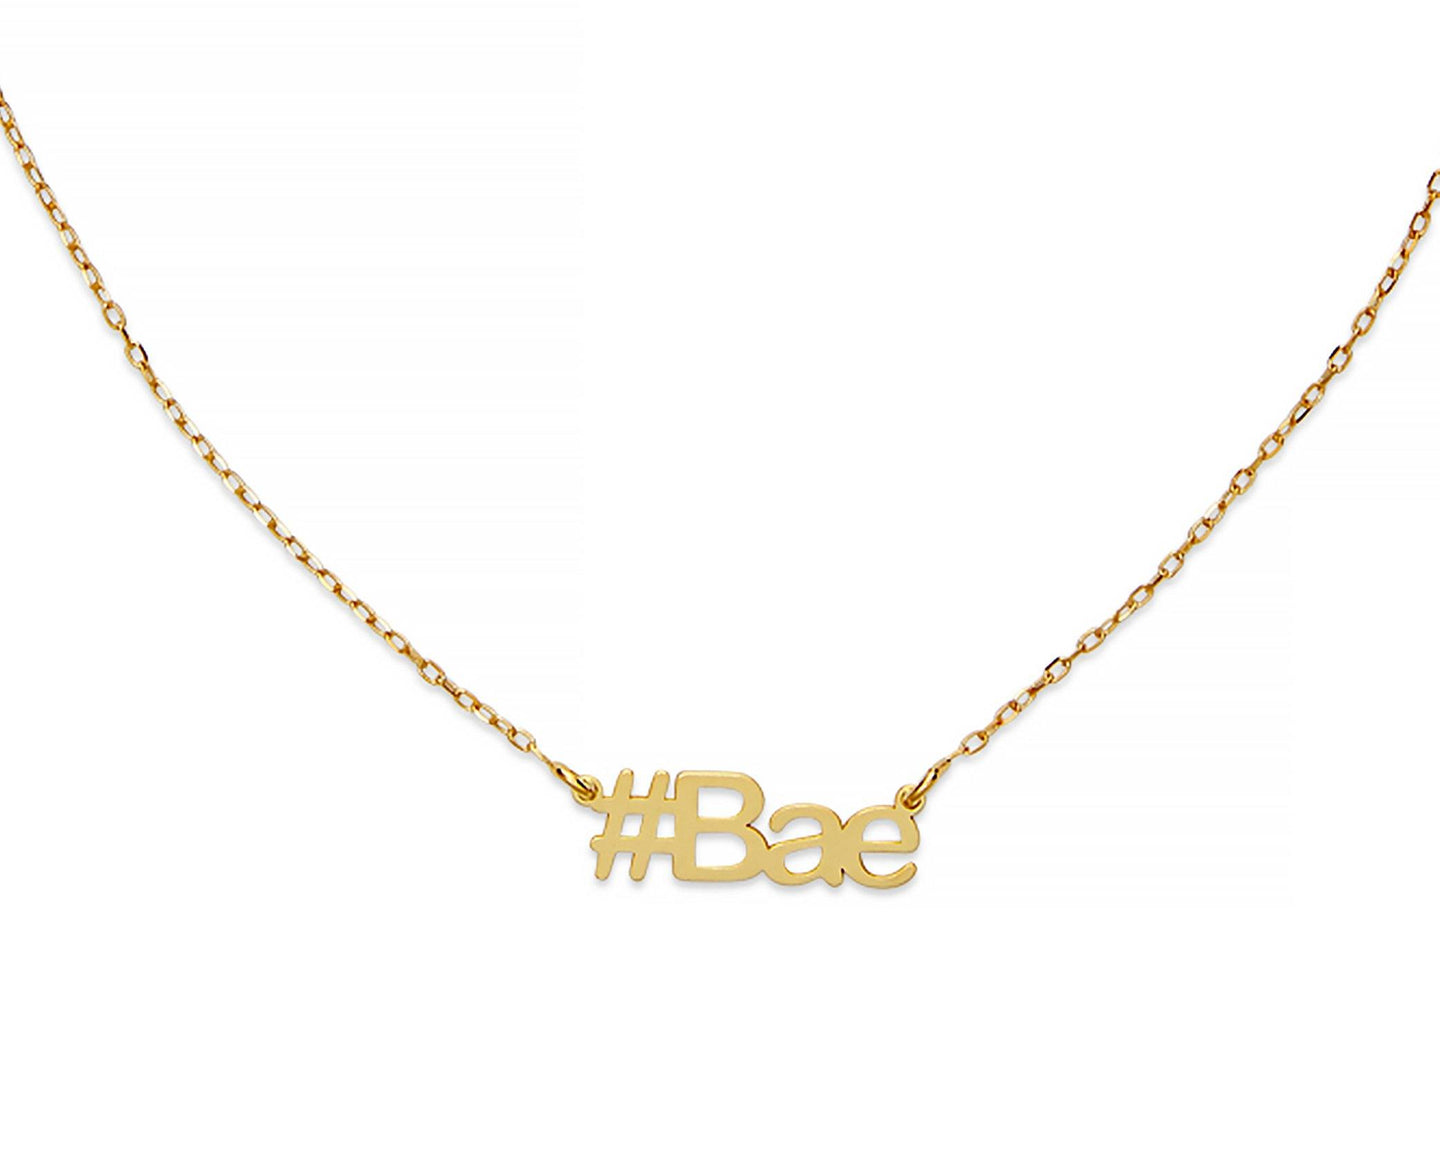 Bae Hashtag Necklace - InclusiveJewelry